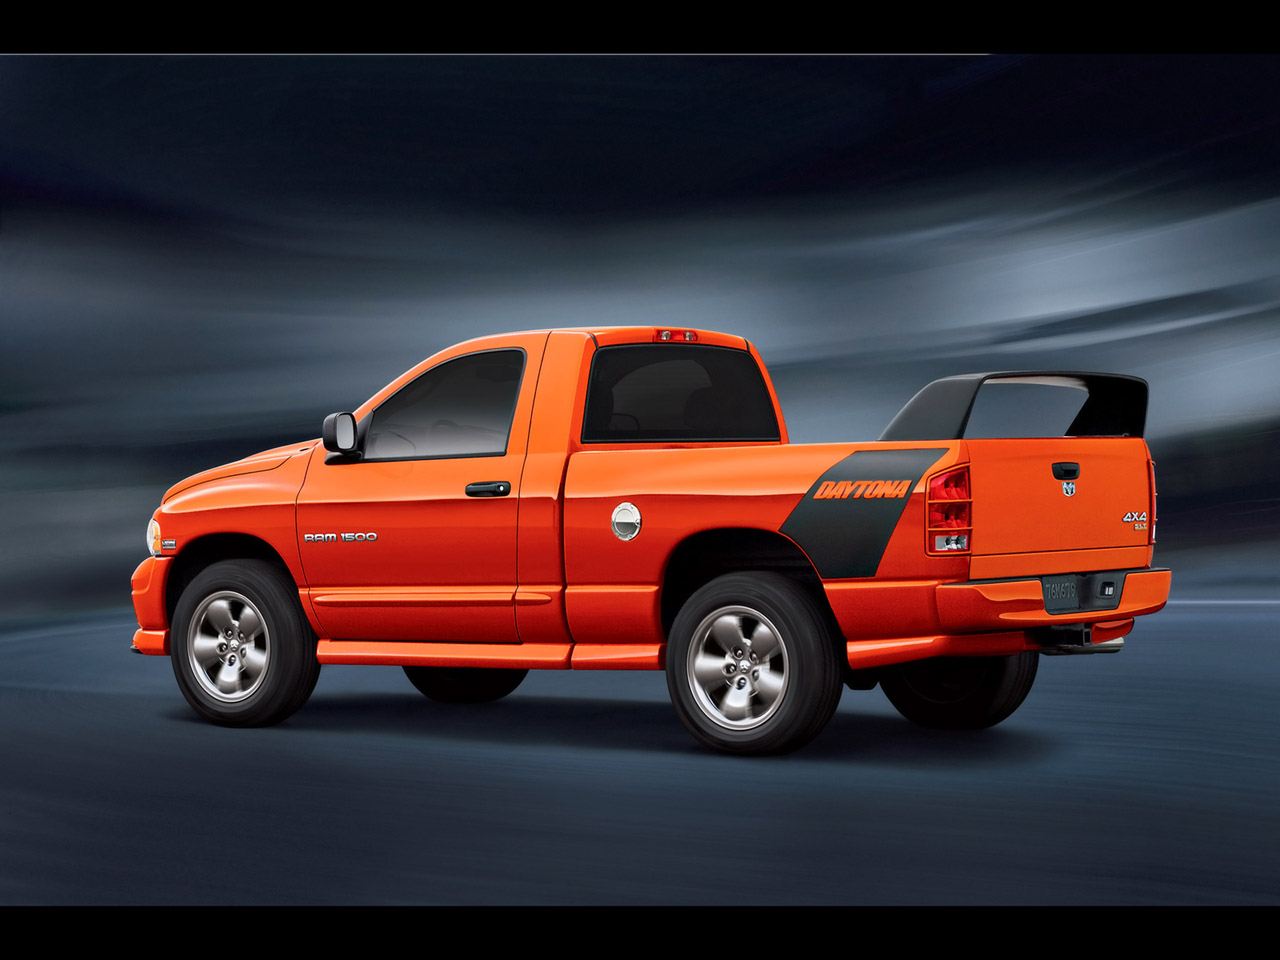 You can vote for this Dodge Ram DAYTONA photo